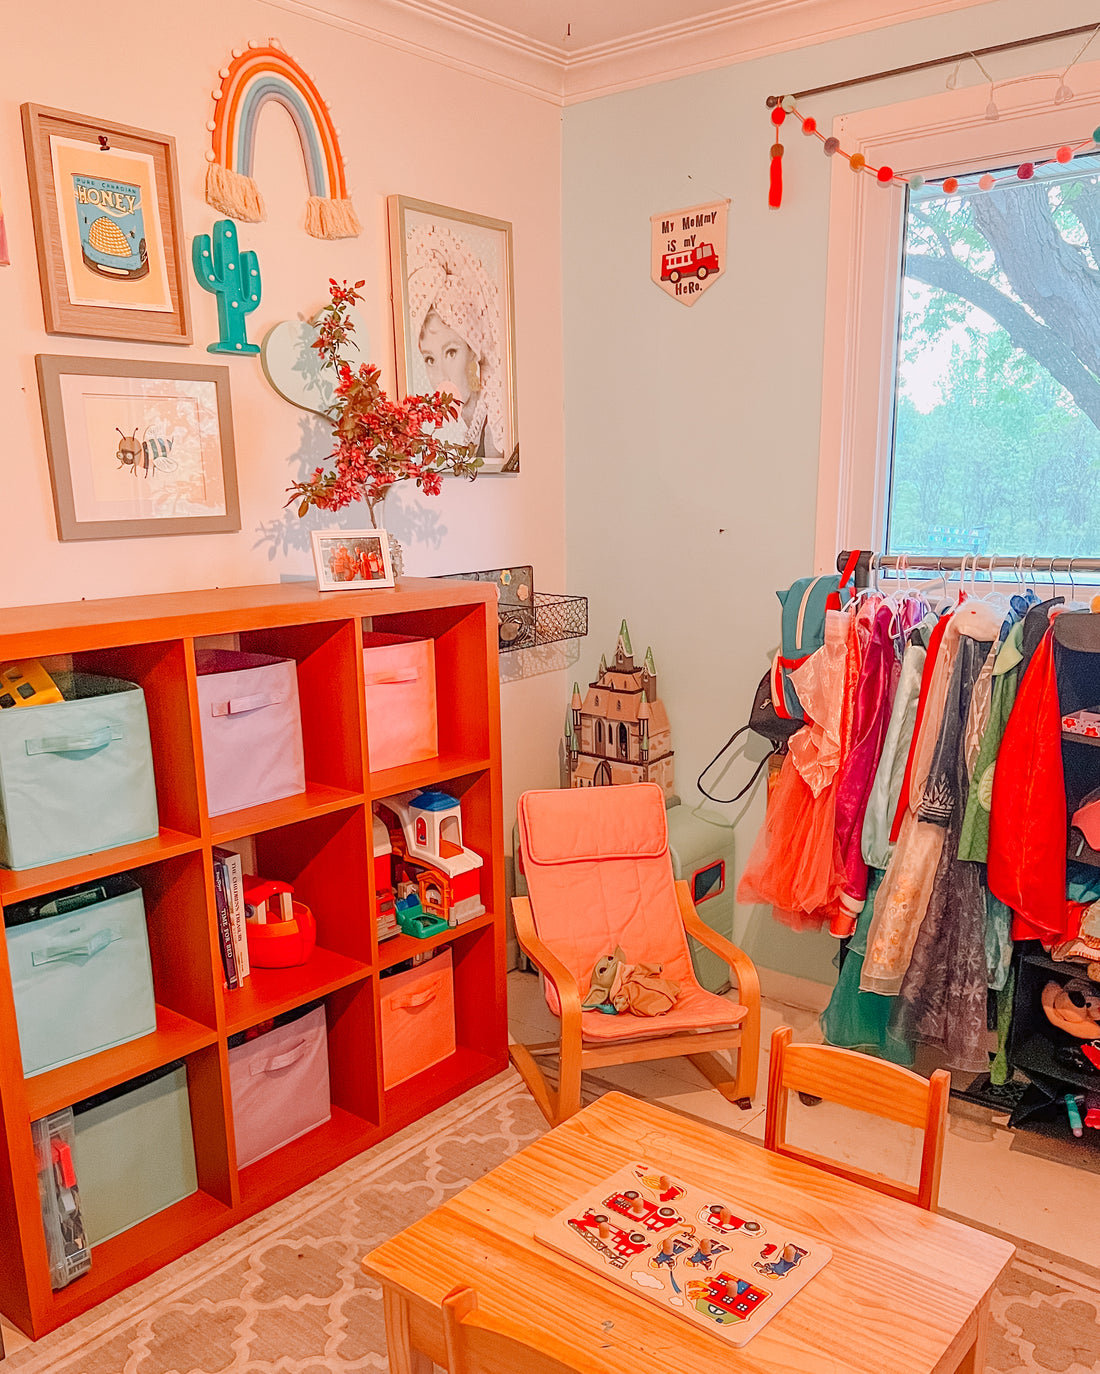 Baby Proofing your Toy Room